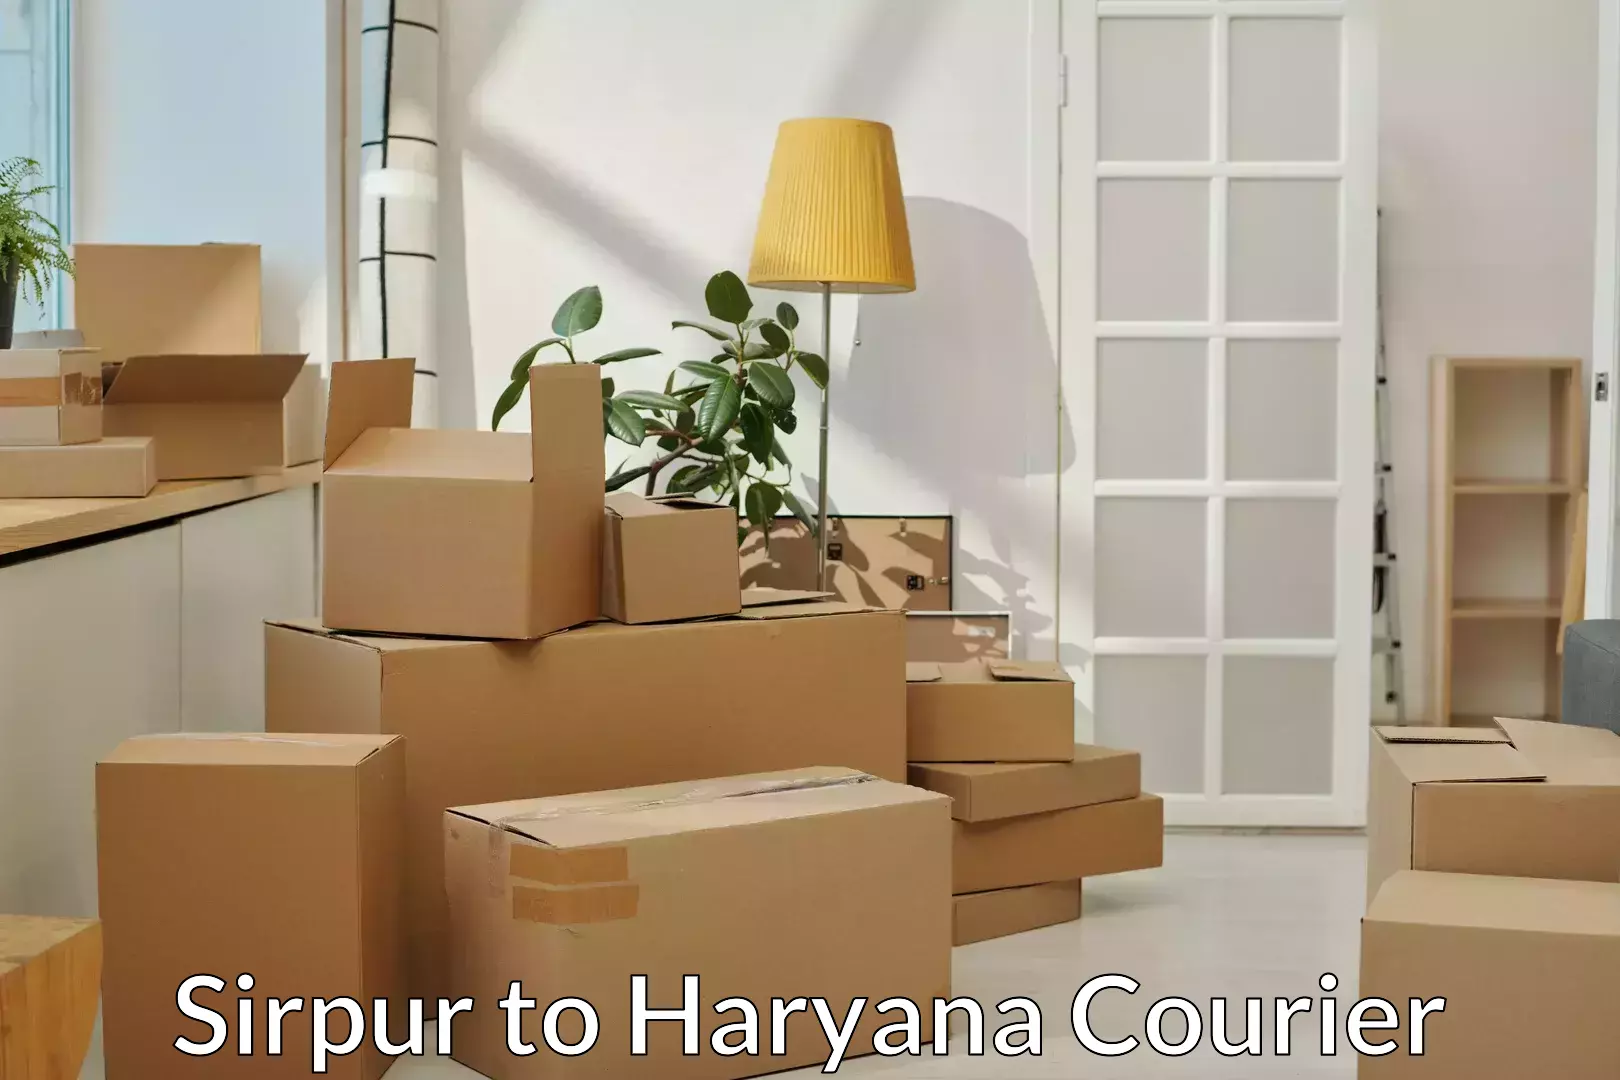 Moving and packing experts Sirpur to Haryana